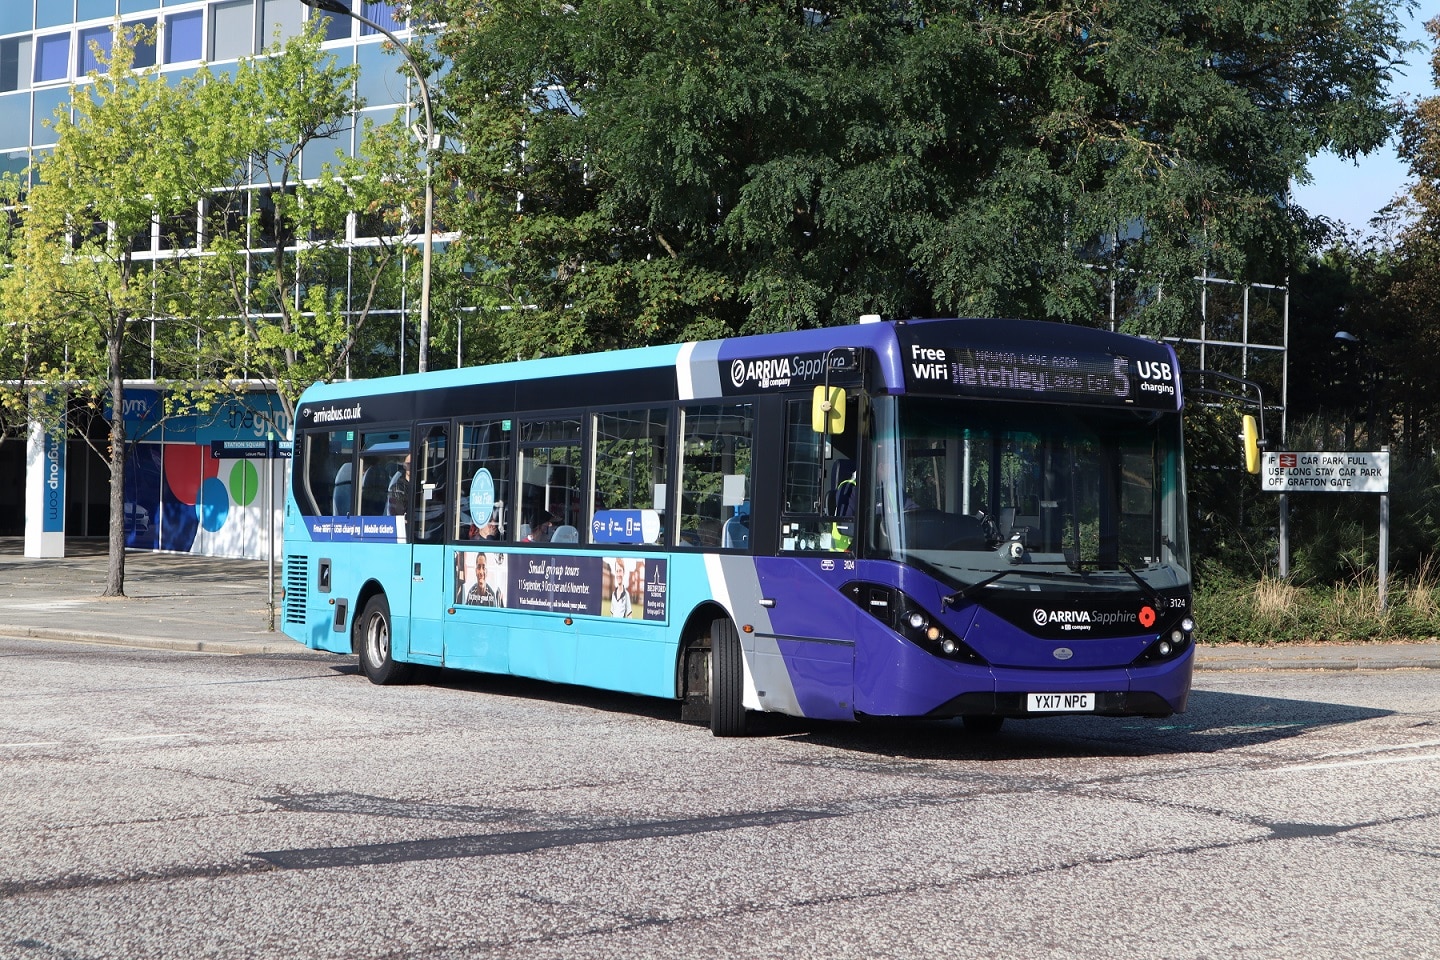 Funding for zero-emission buses in England generated head scratching and riddle solving